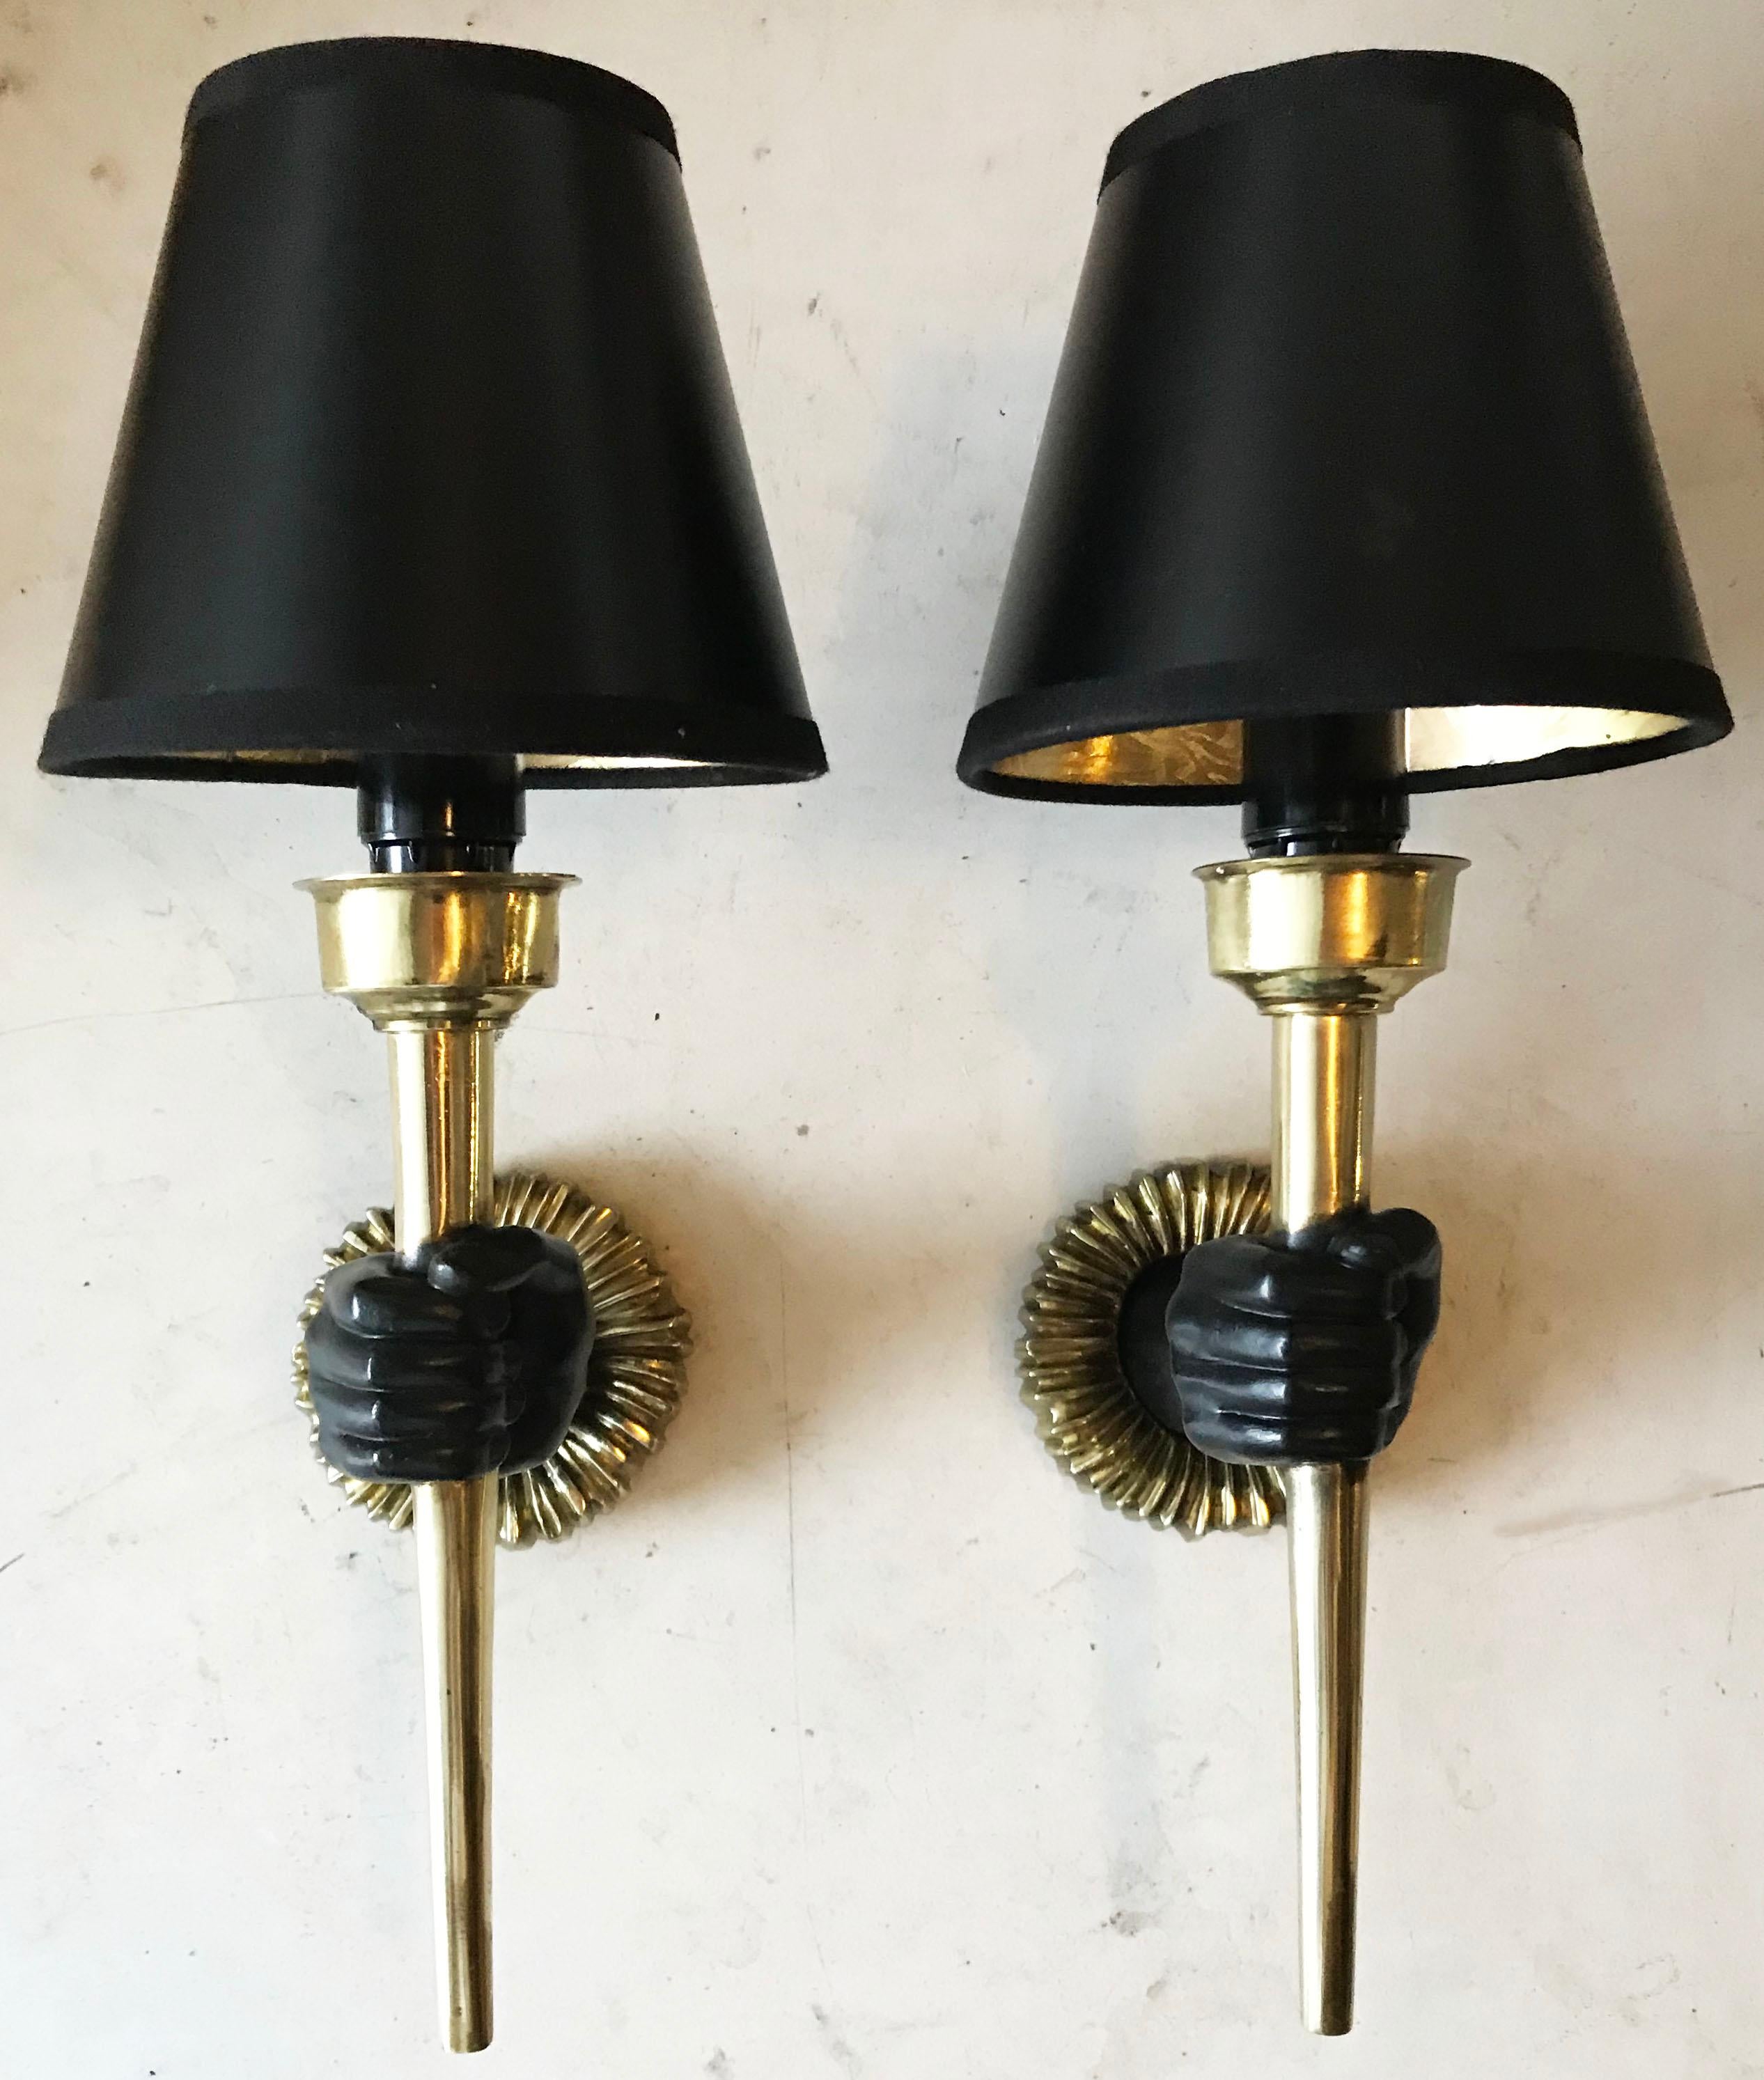 Superb pair of bronze and brass hands sconces, made by the 1960 John Devoluy for the Parisian market .
US Rewired and in working condition.
Backplate is 3 inches diameter
Measures: Shade is 3/ 5 / 4.5 inches.